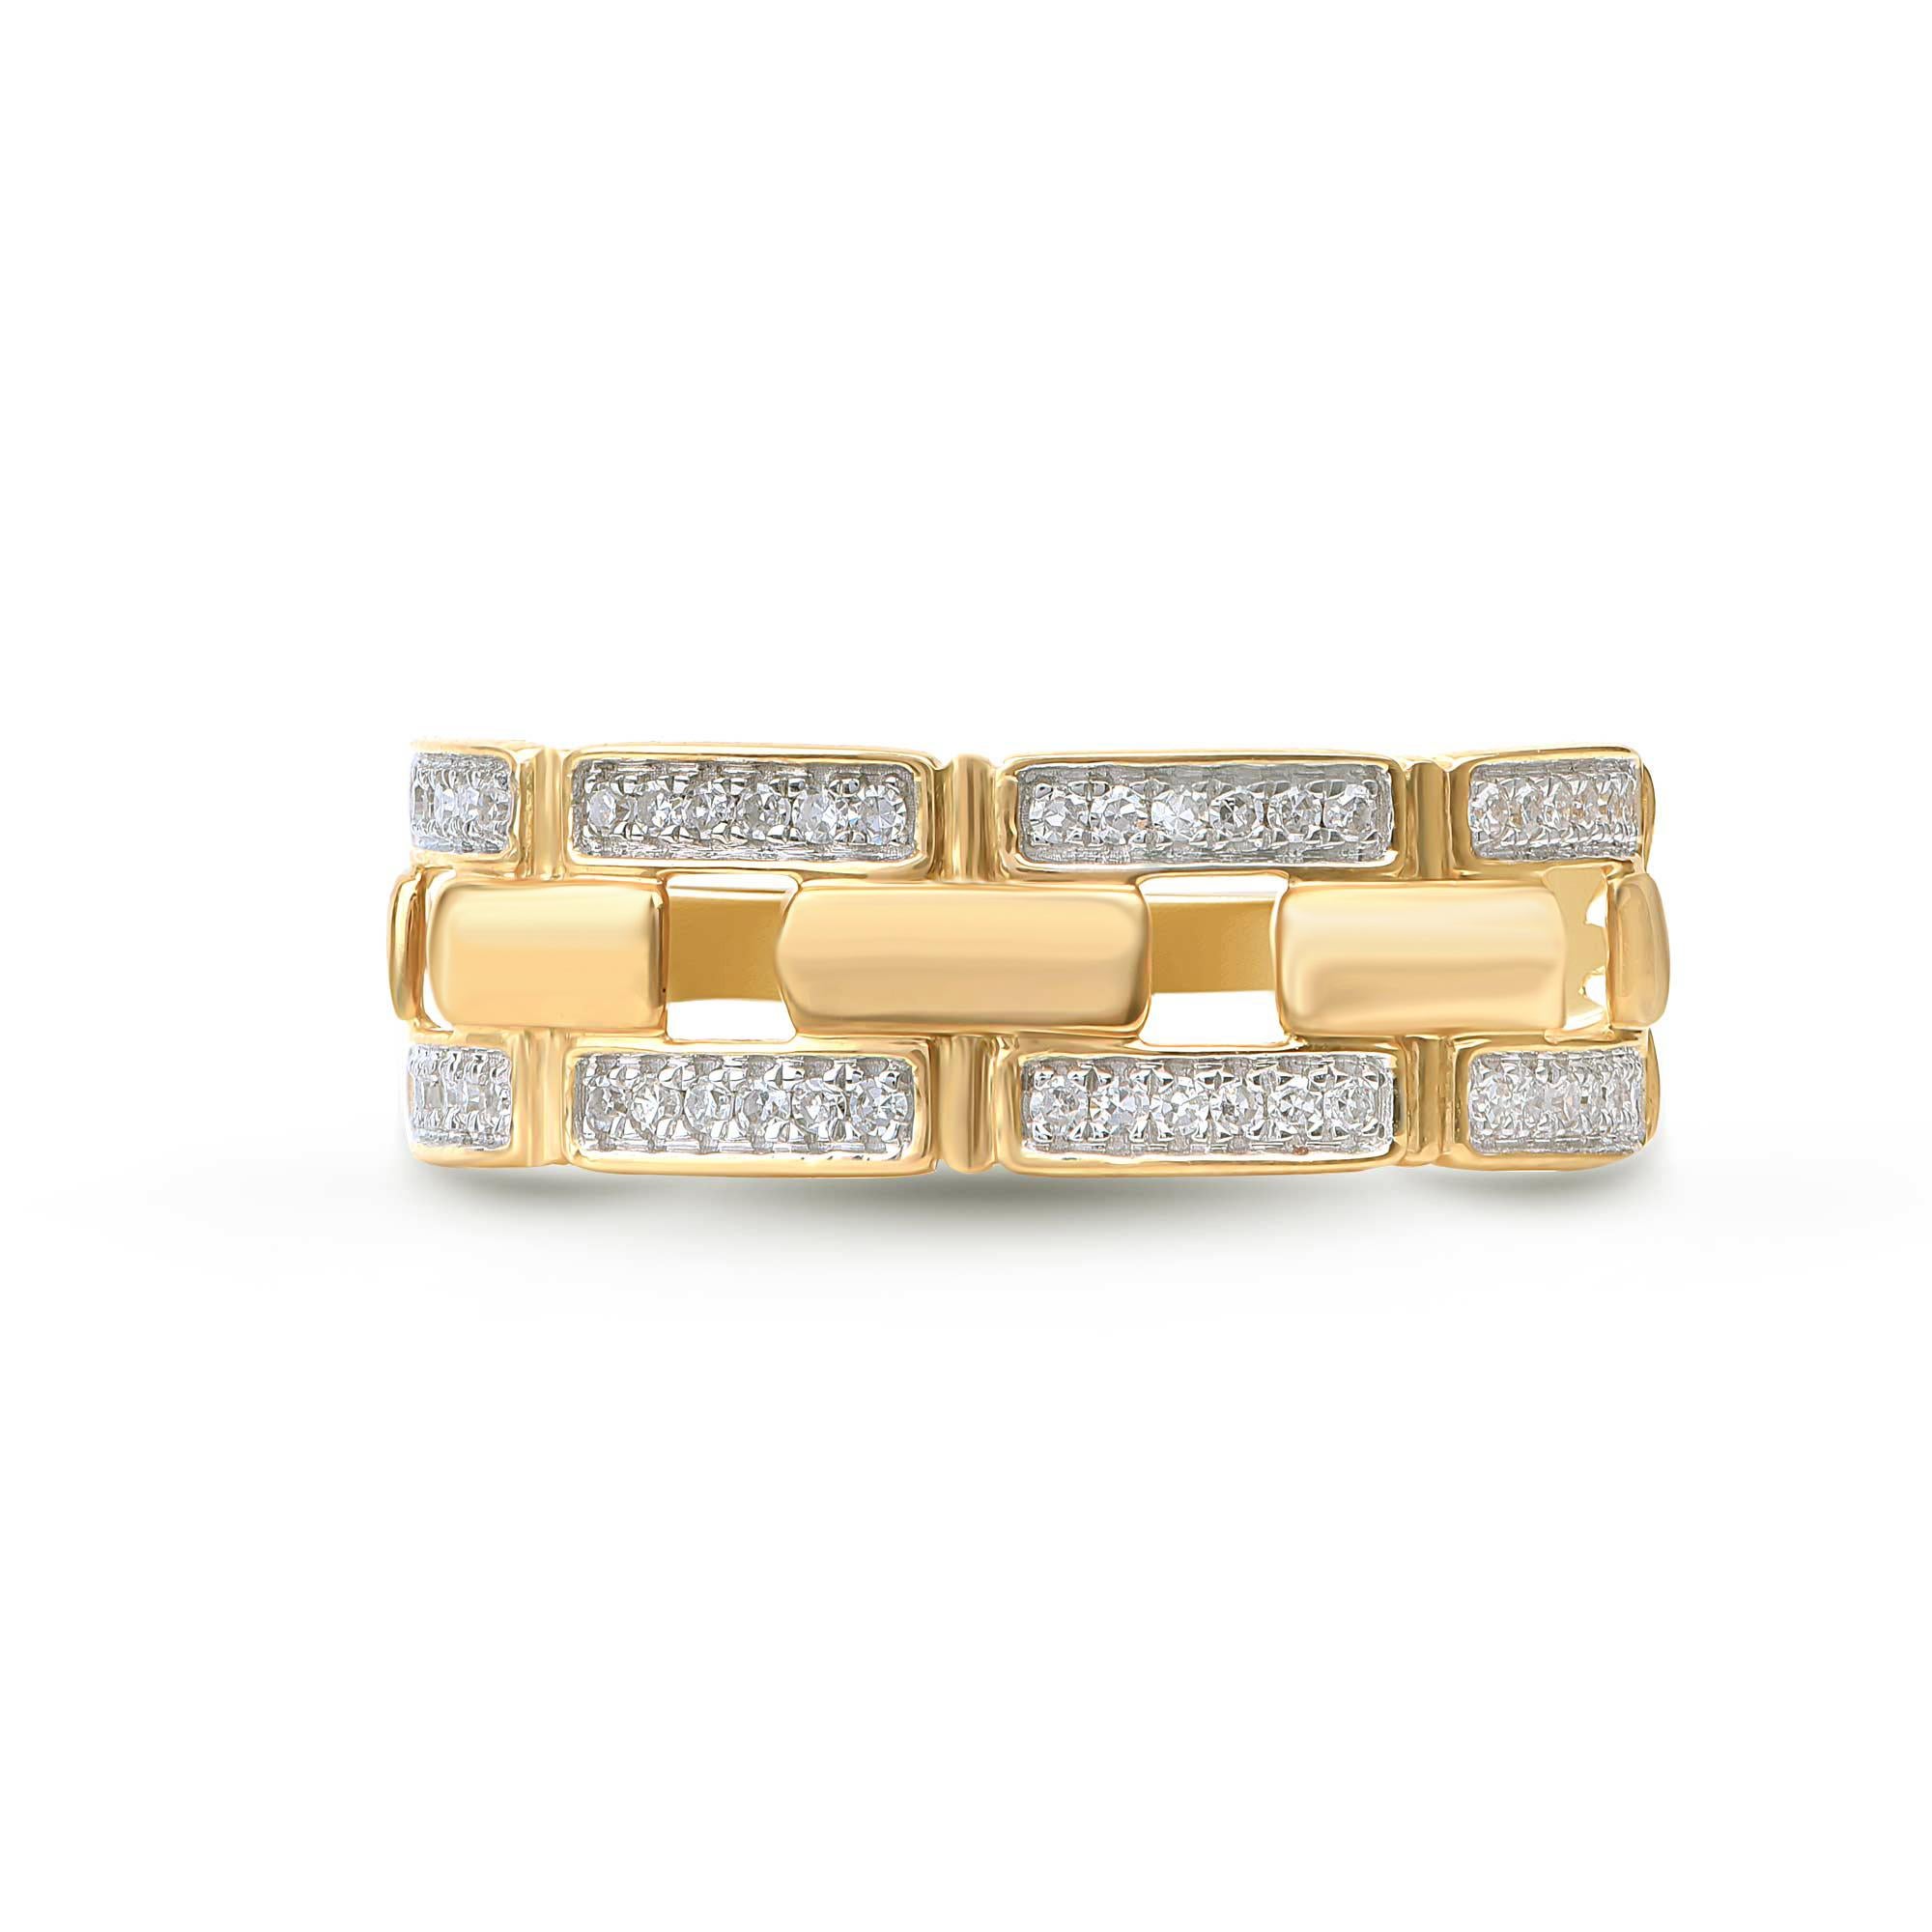 Studded with 48 natural brilliant diamonds in micro-prong setting and designed beautifully in 18-karat yellow gold. Diamonds are graded H-I Color, I2 Clarity. 

Metal color and ring size can be customized on request. 

This piece is made to order.